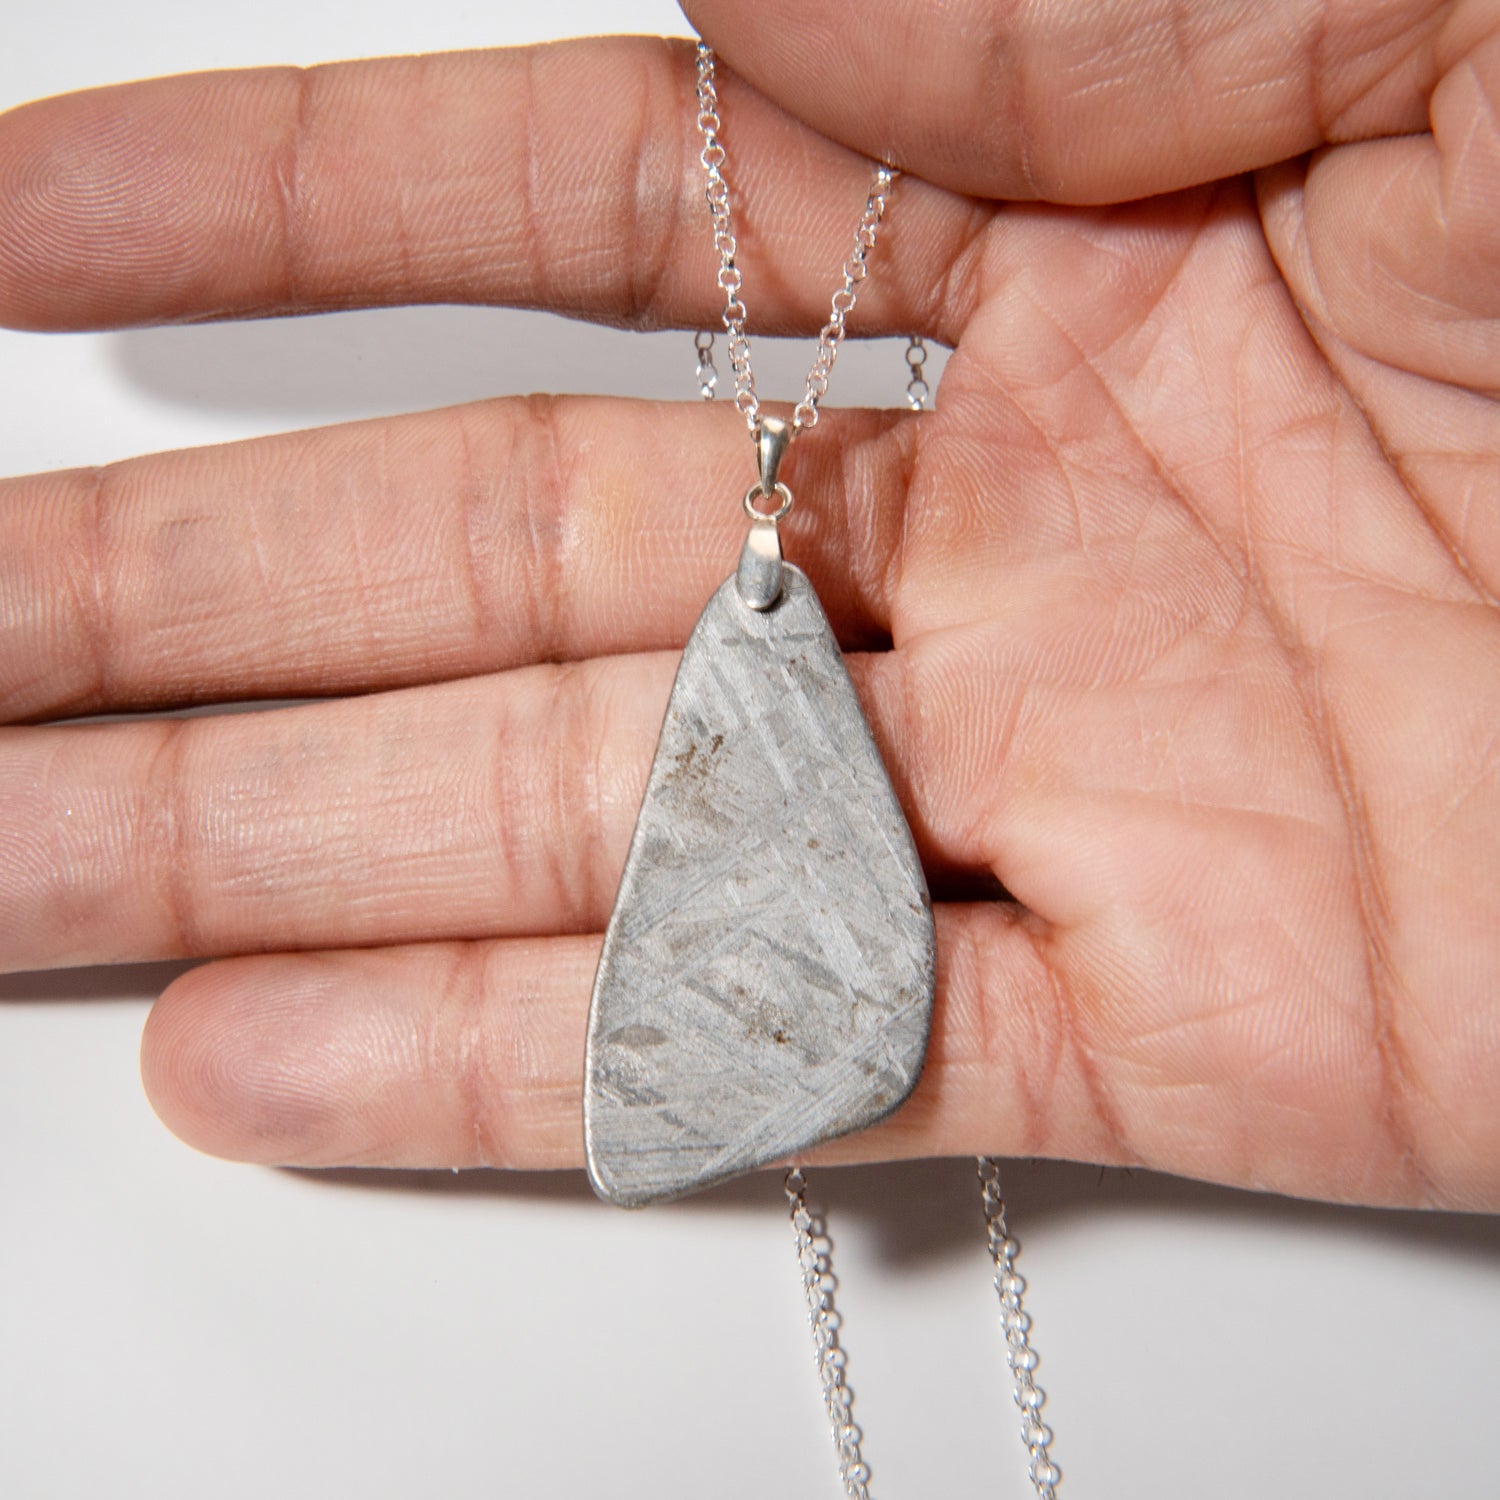 Polished Seymchan Meteorite pendant (8.8 grams) with 18" Sterling Silver Chain